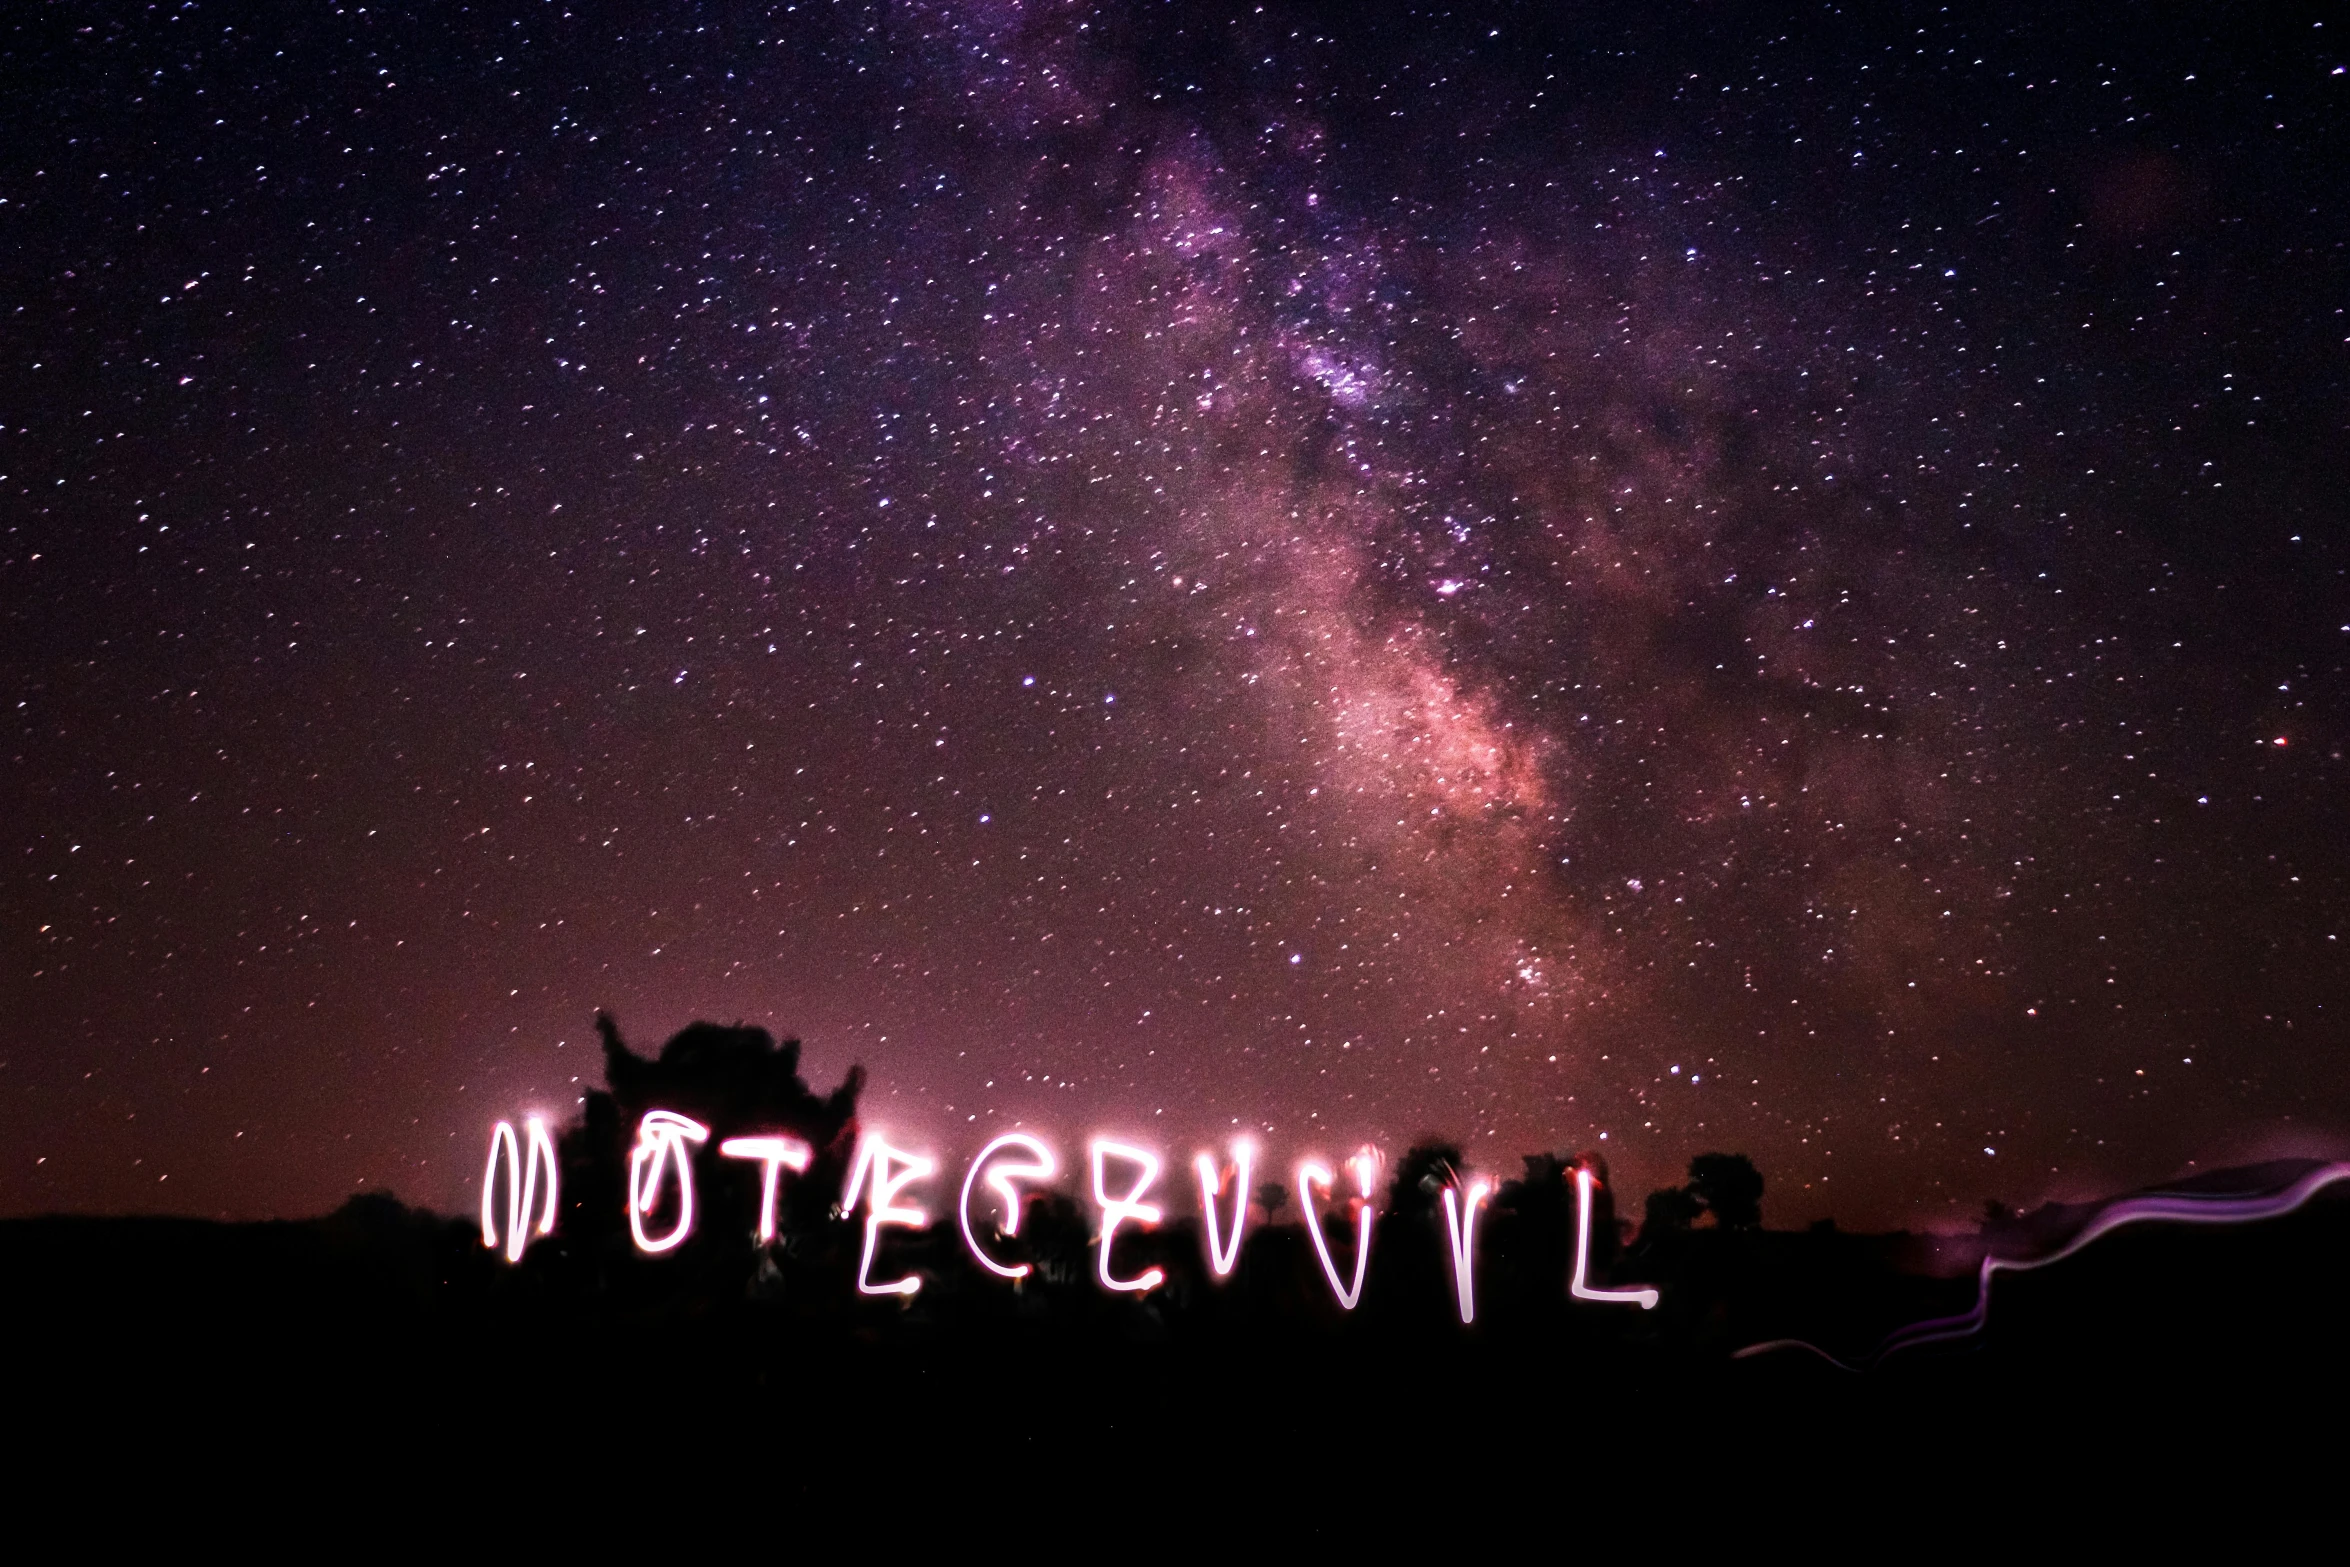 a view of a night sky with the words otdegevil lit up